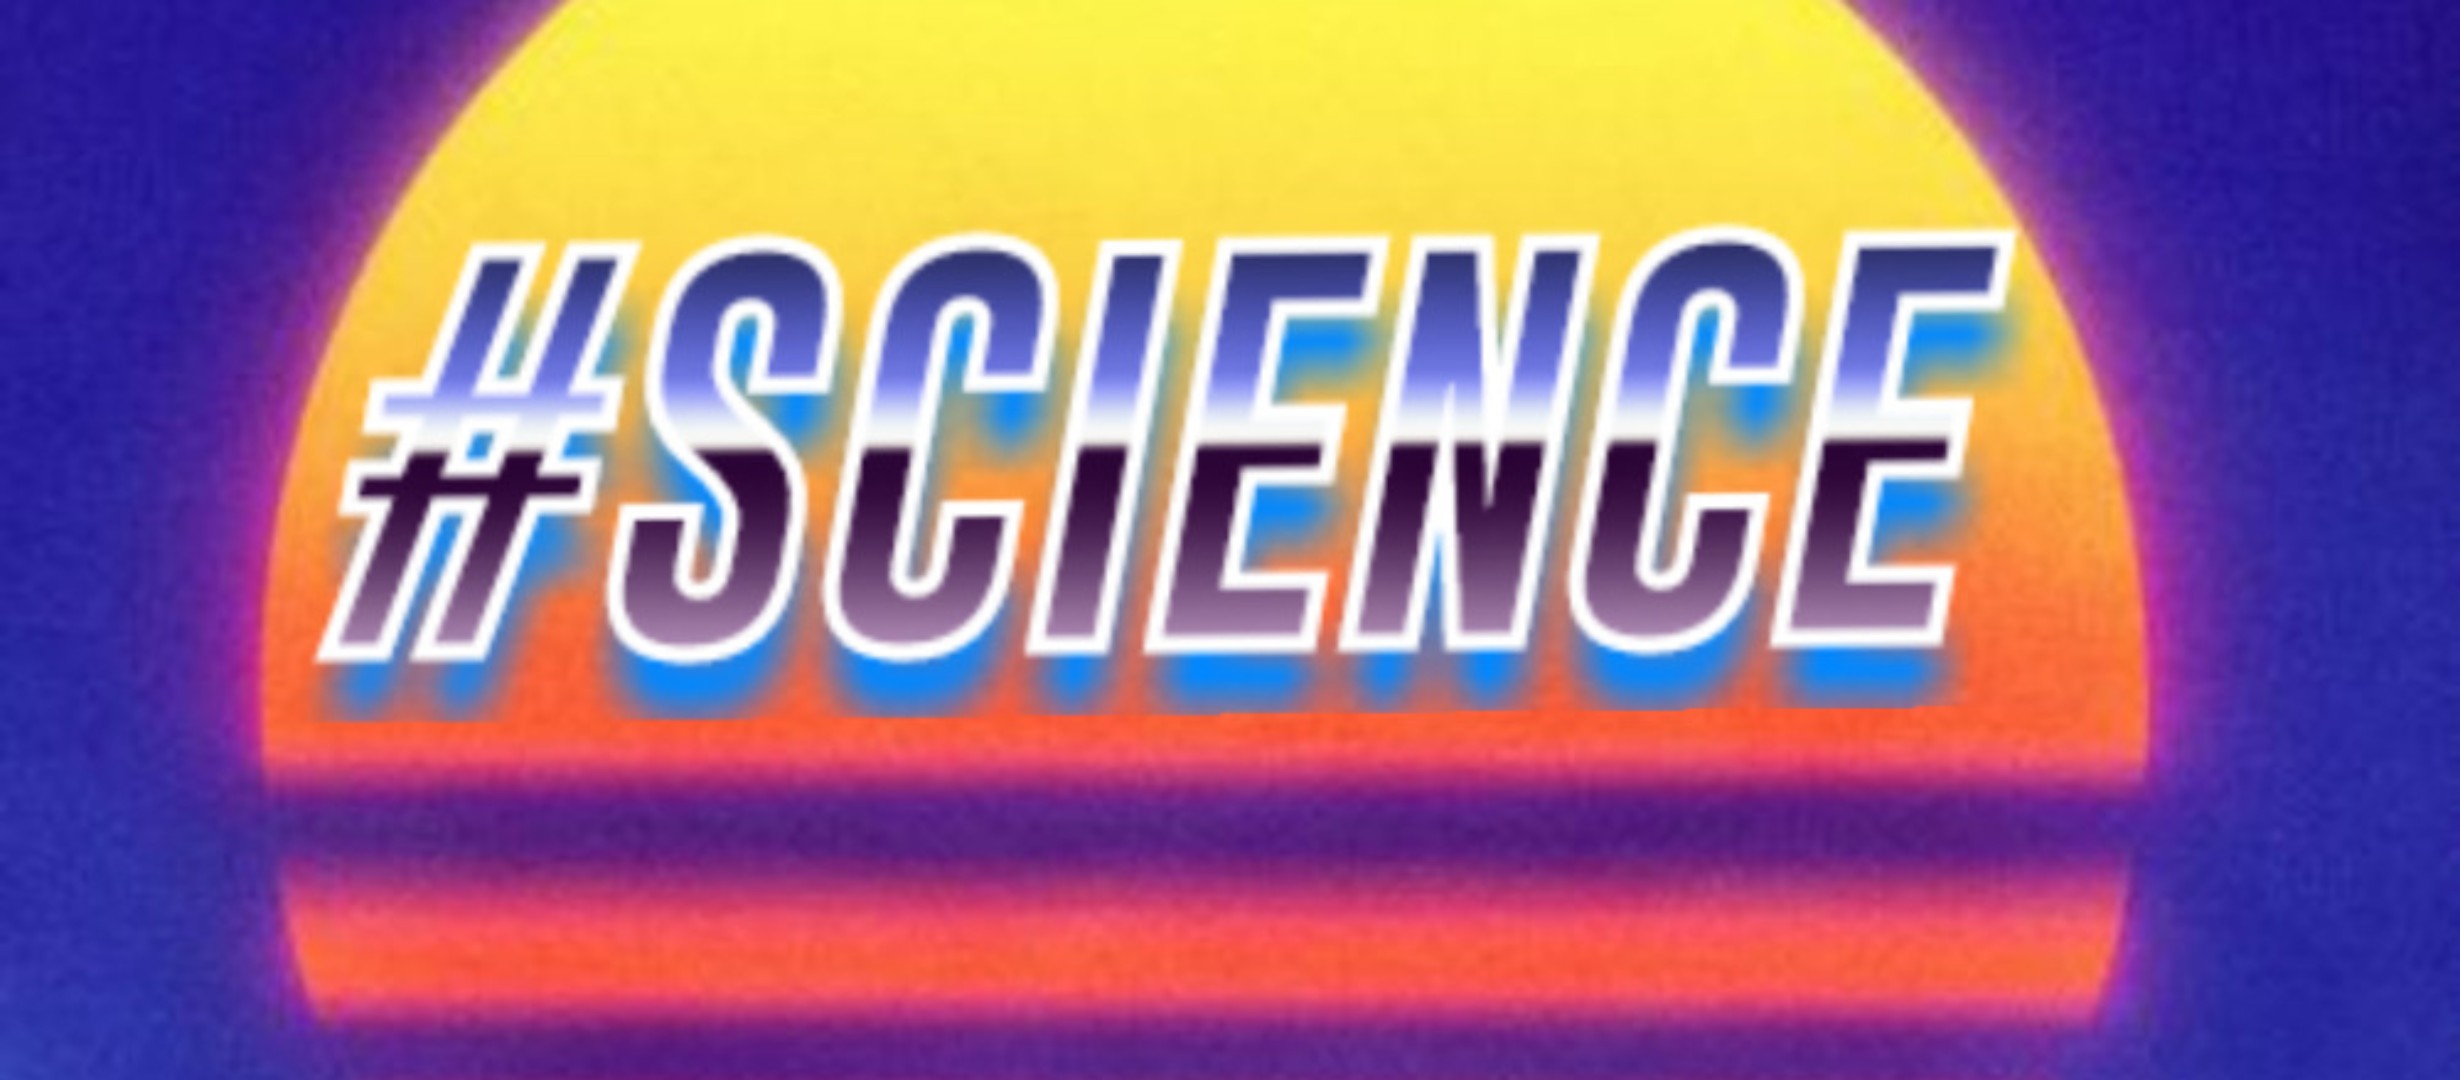 image depicting sunrise/sunset with the word '#science' over it